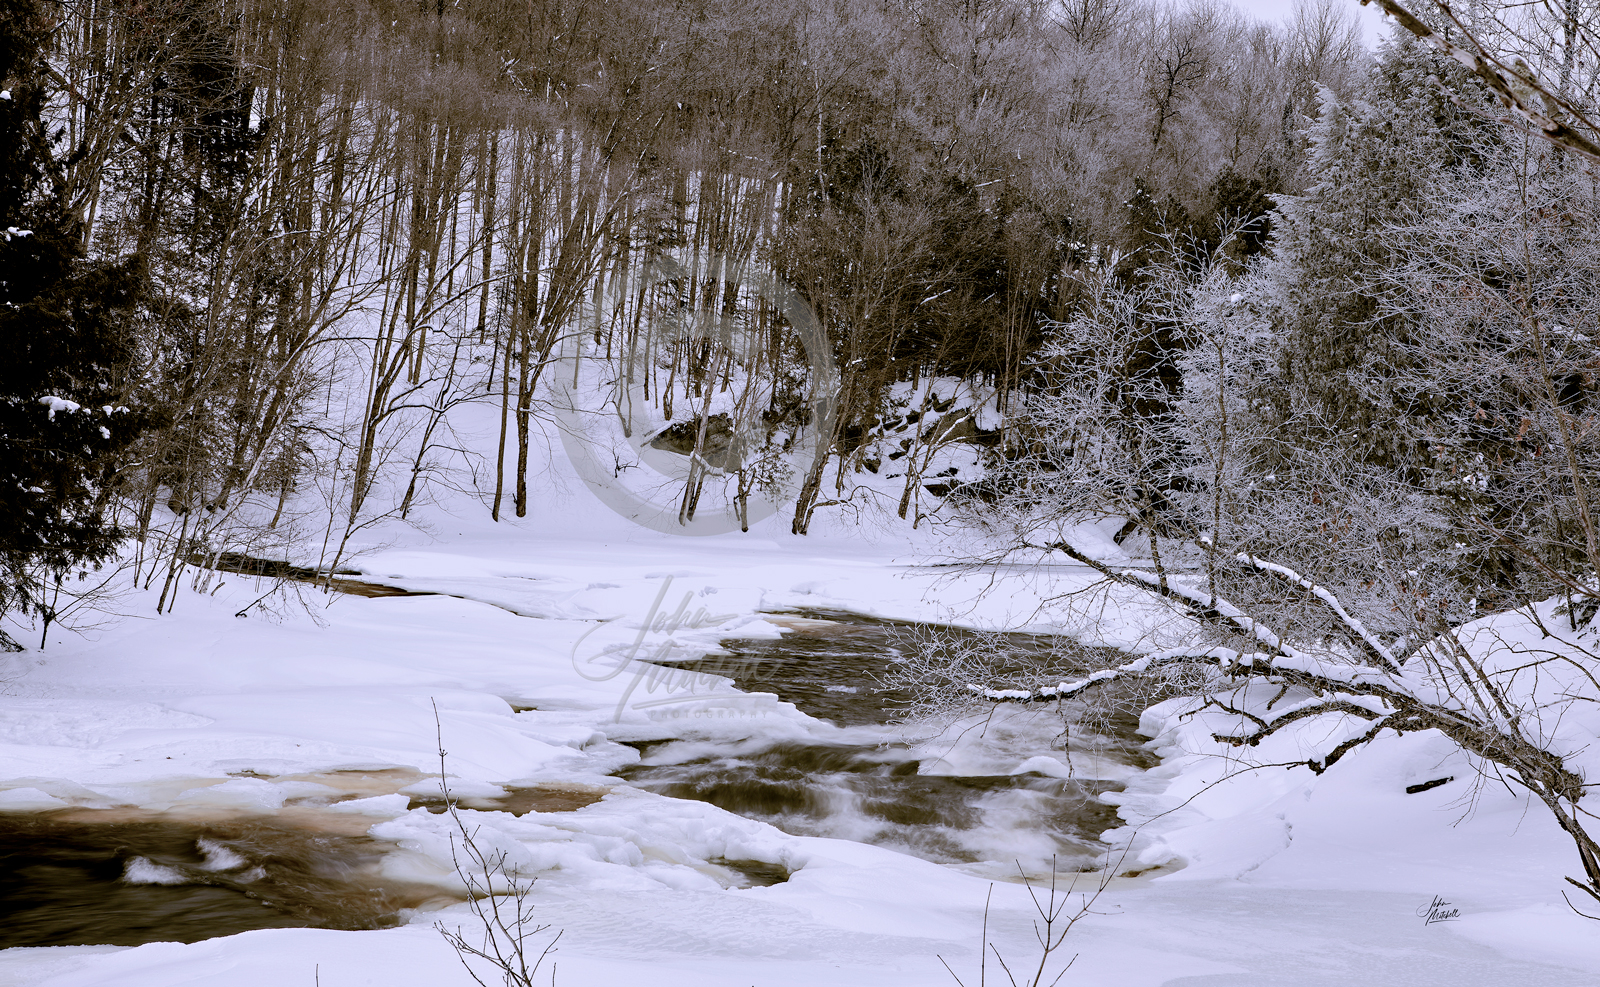 OXTONGUE RAPIDS IN WINTER